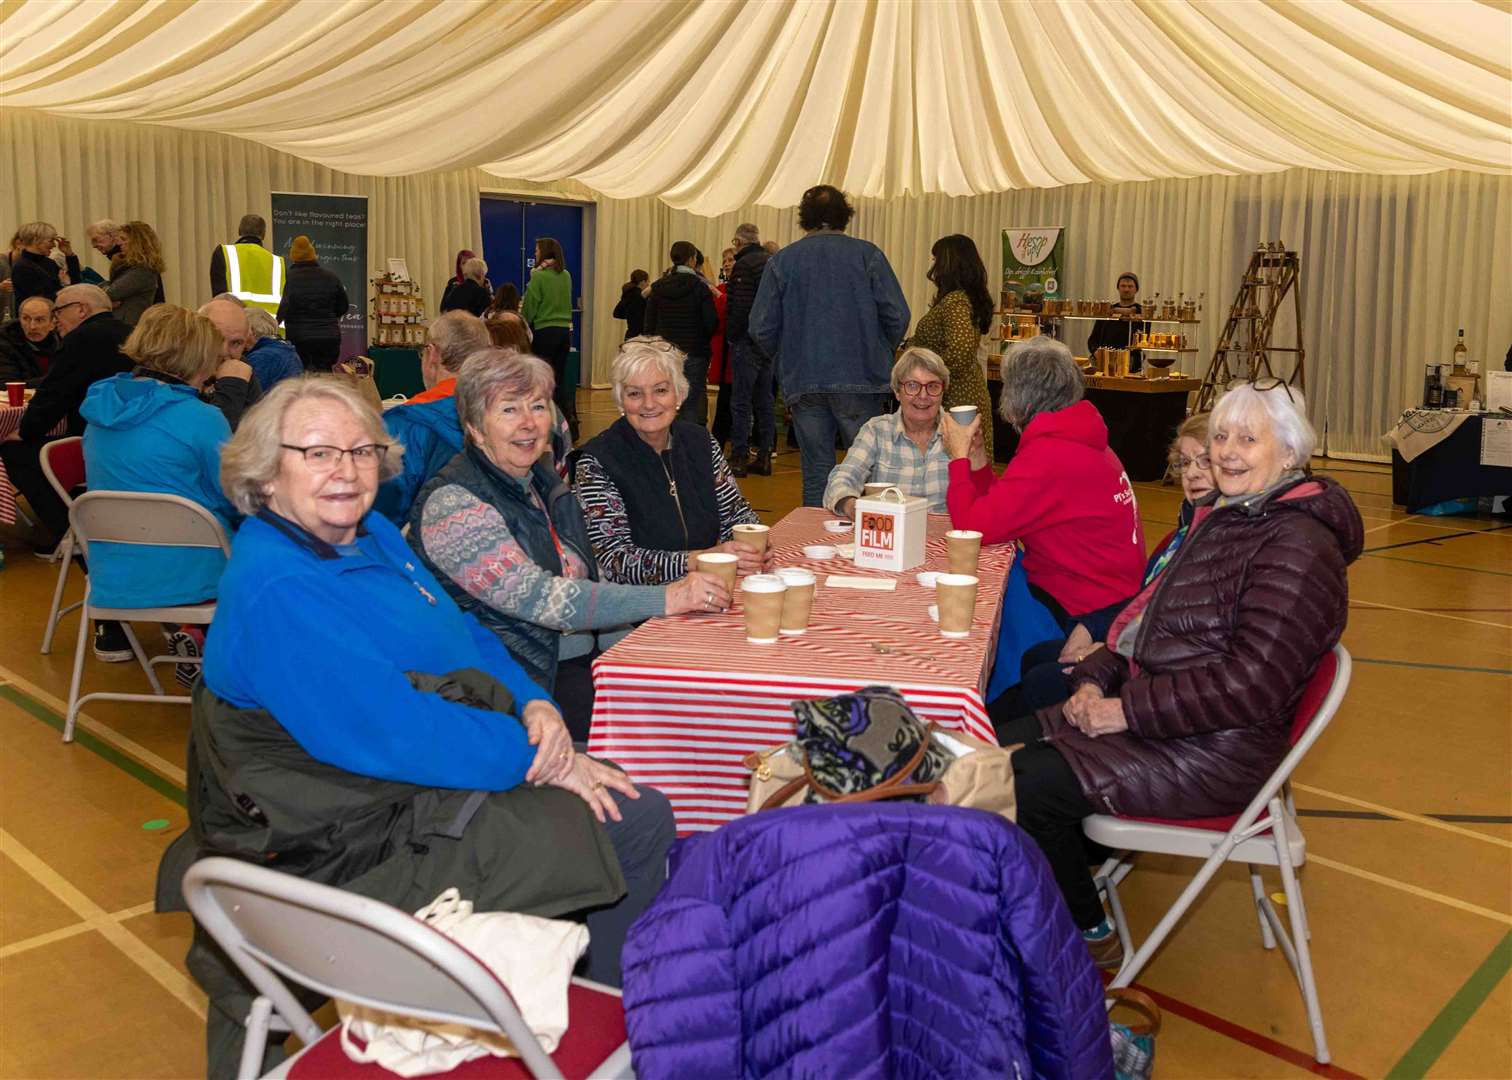 Enthusiasts came from all over the strath to enjoy the Food Hall